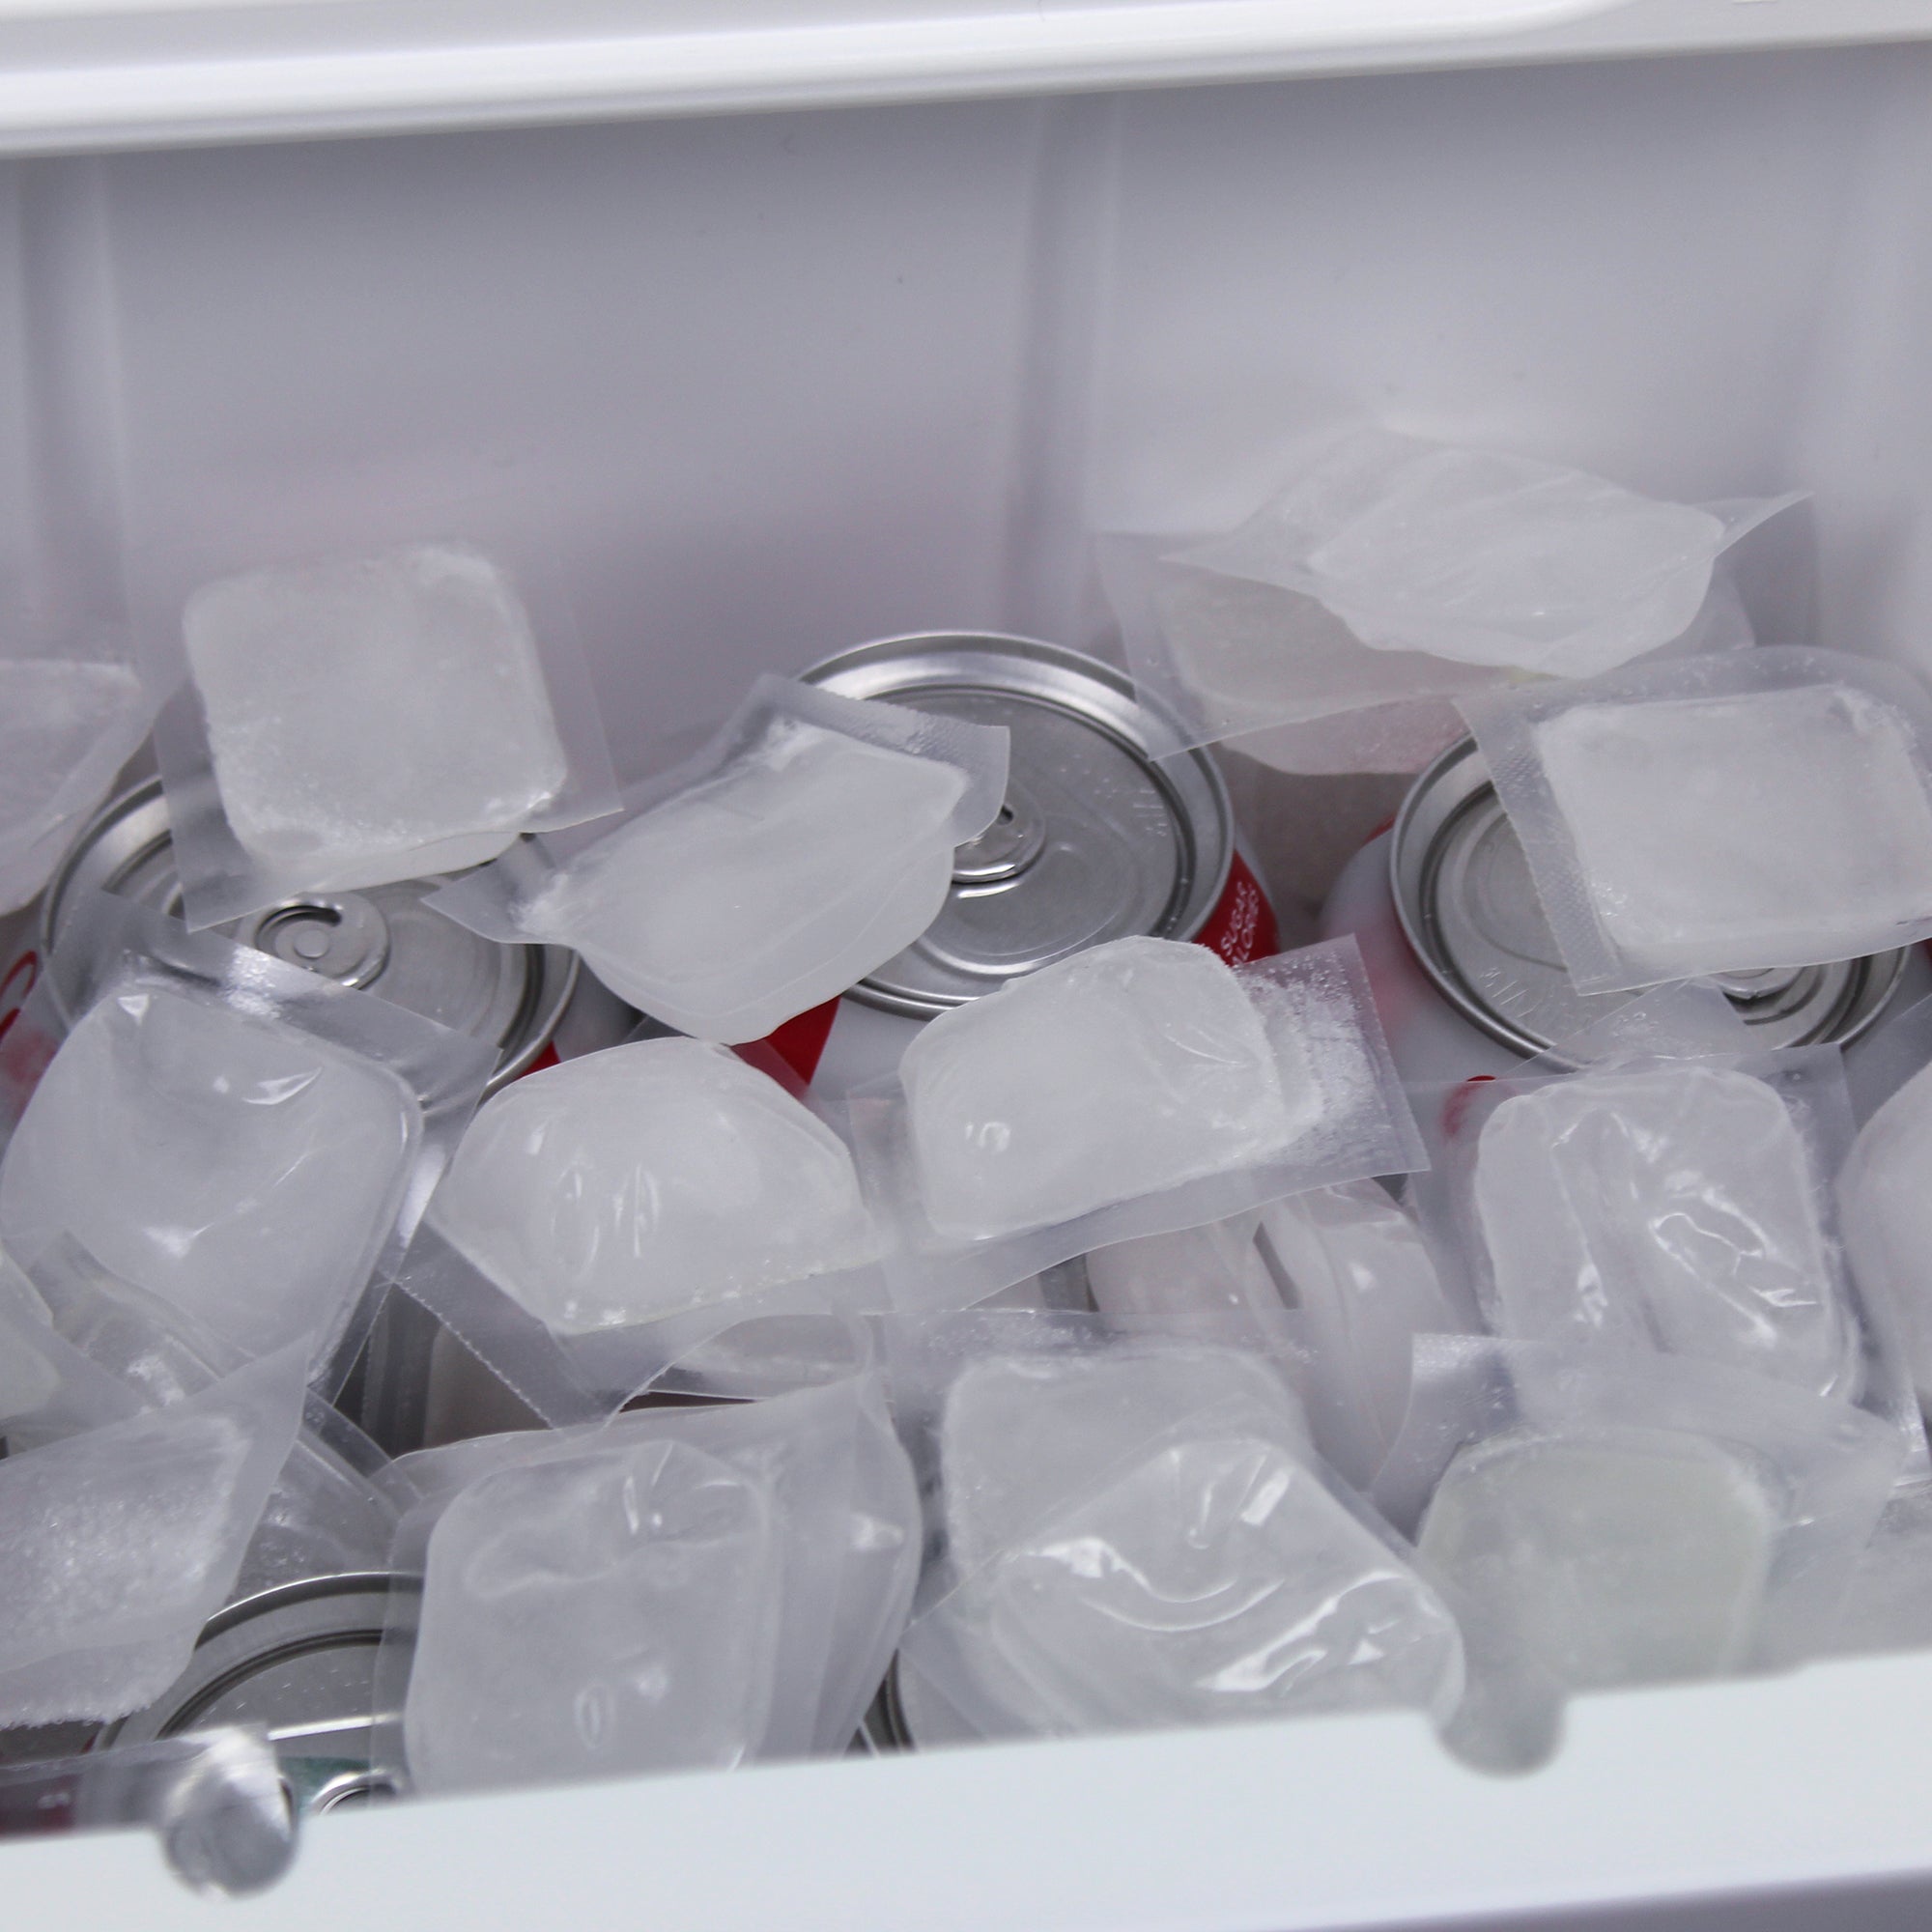 Close up of open cooler of soda, filled with individual refreezable FlexiFreeze cooler cubes